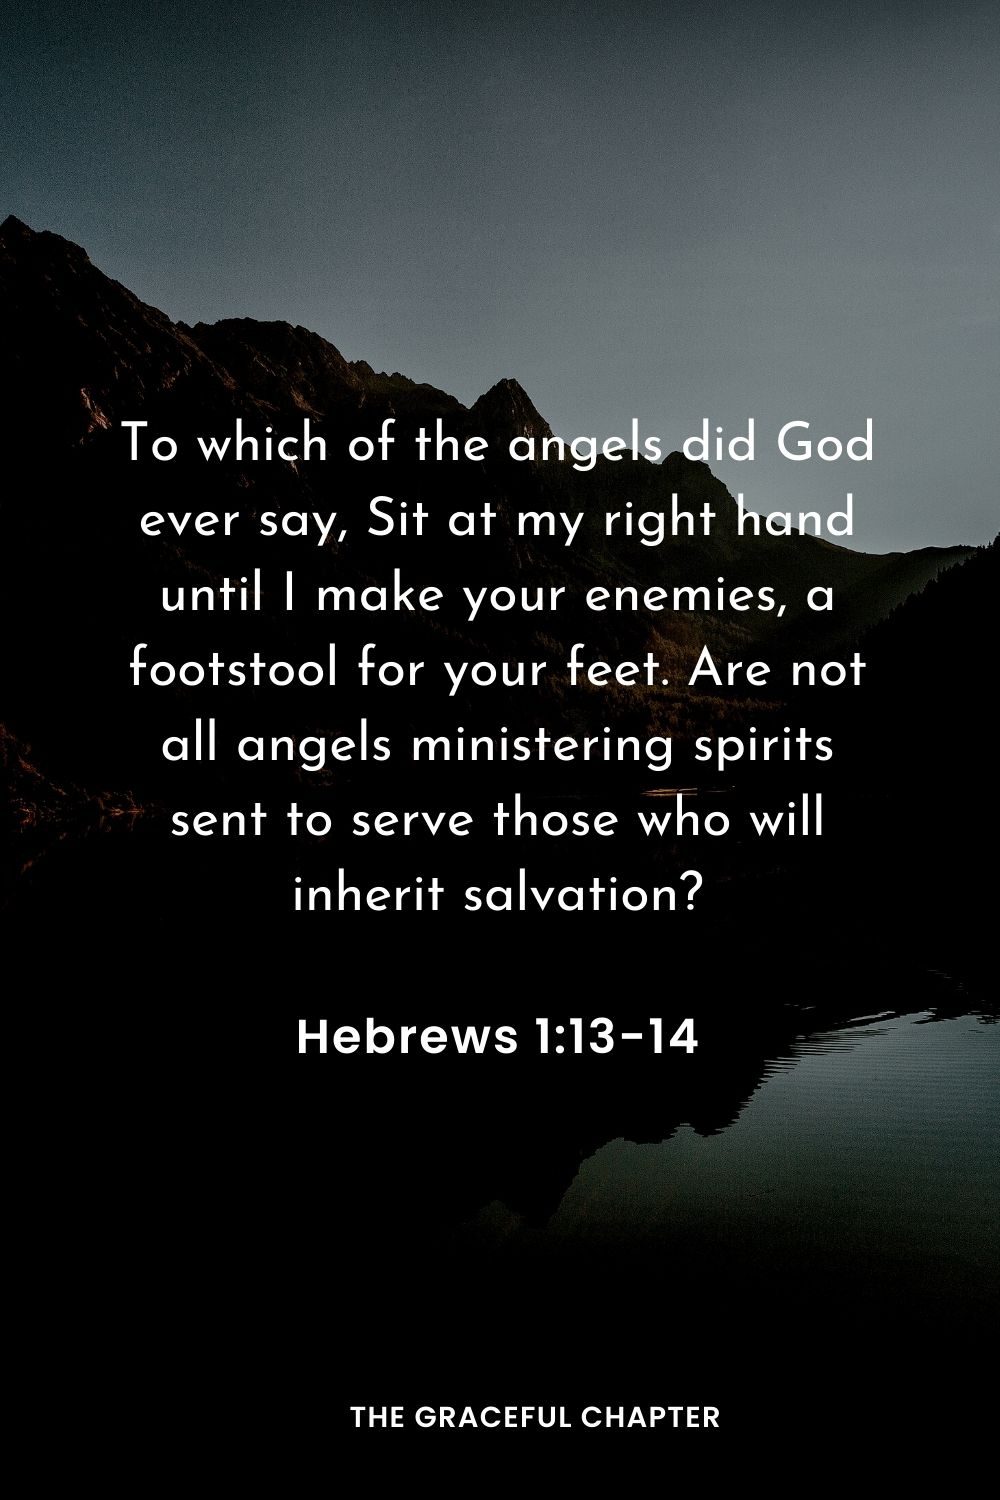 To which of the angels did God ever say, Sit at my right hand until I make your enemies, a footstool for your feet. Are not all angels ministering spirits sent to serve those who will inherit salvation?